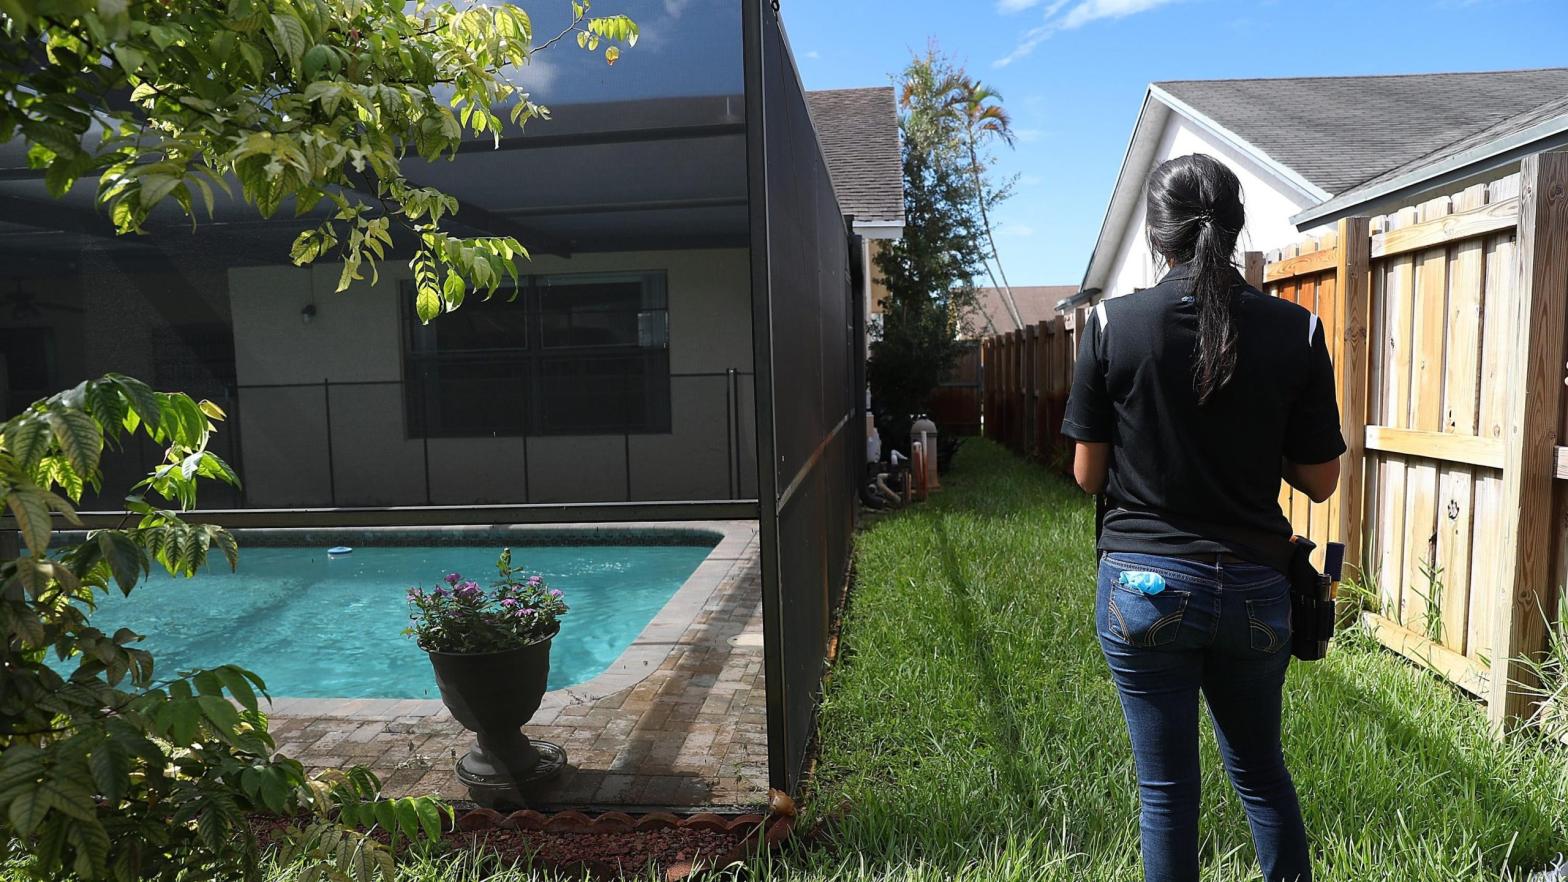 A Zillow home evaluator, Claudia Teyssandier, evaluating a home in Lauderhill, Florida in August 2019. (Photo: Joe Raedle, Getty Images)